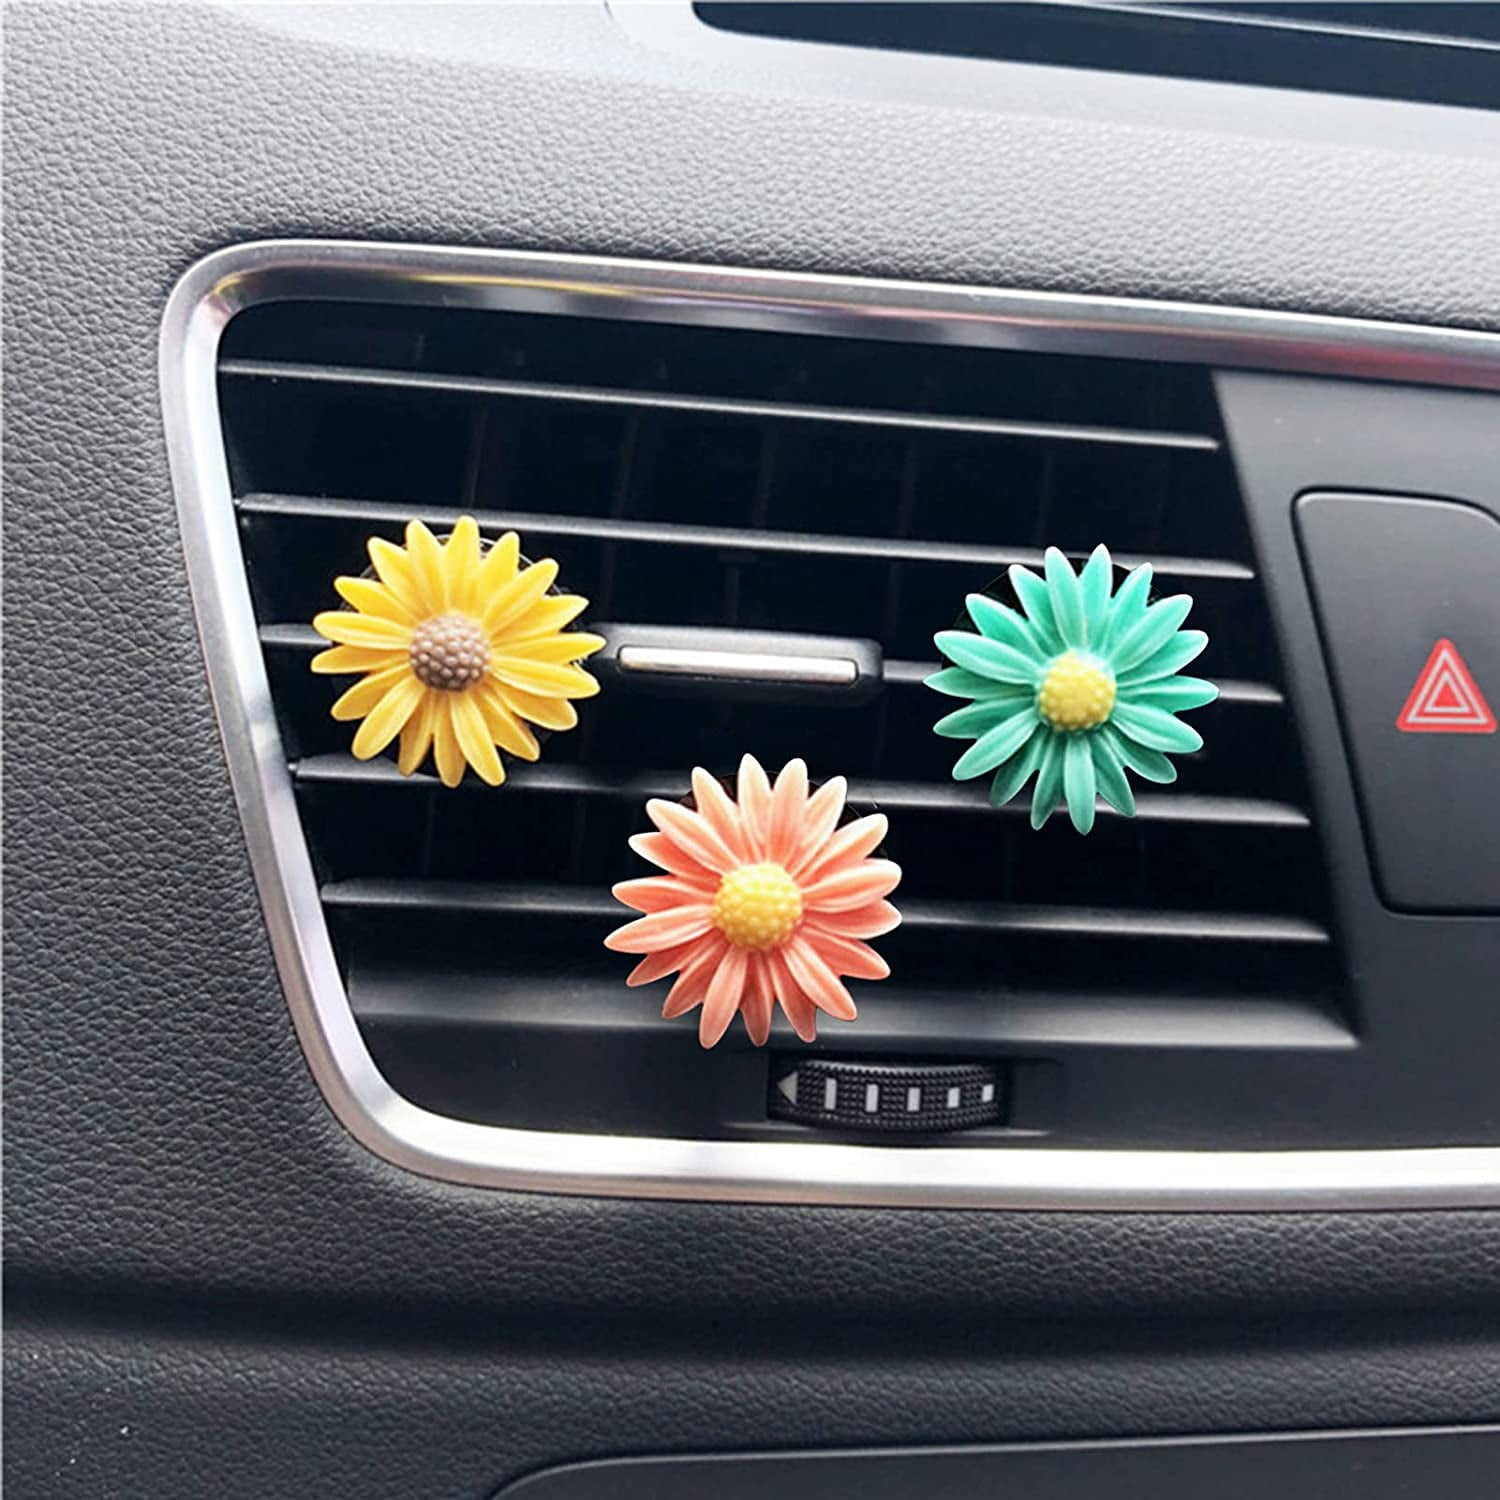 Whaline 6 Pieces Flowers Car Air Vent Clips with Fragrance Pads Colorful  Daisy Flower Car Air Freshener Groovy Retro Hippie Flowers Air Vent